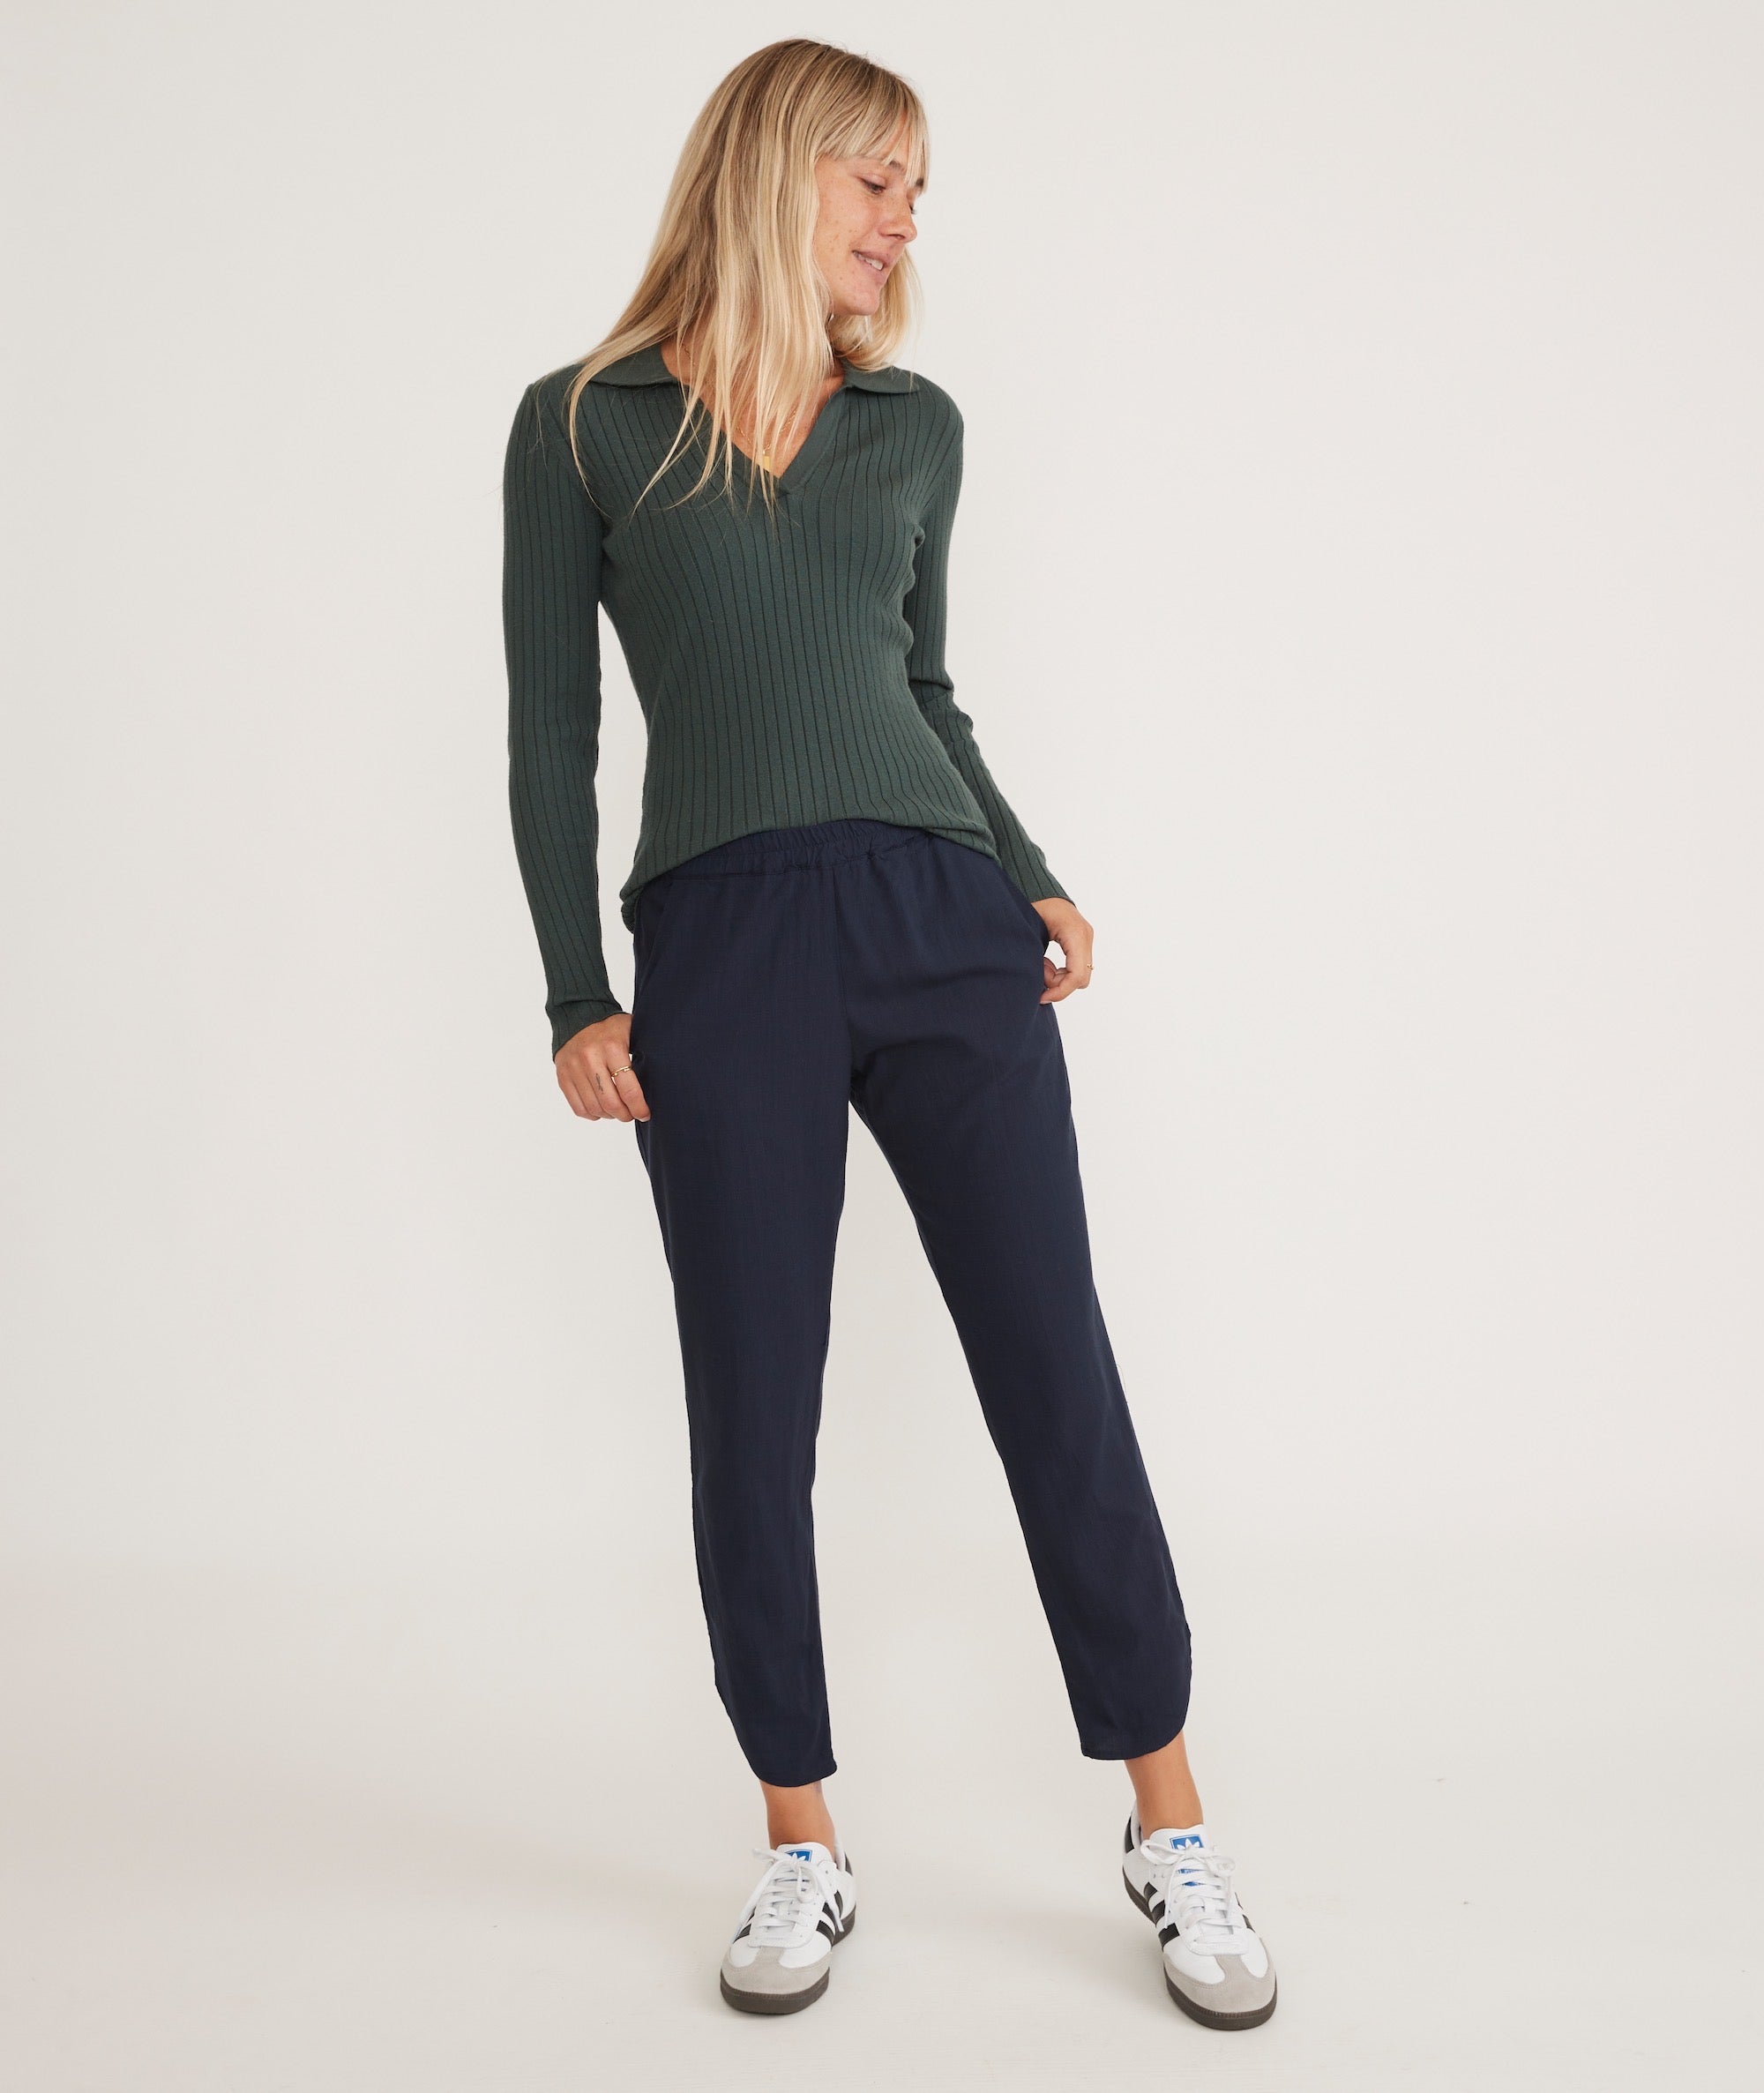 Petite – and Navy Re-Spun in Layer Tall Pant Marine Allison